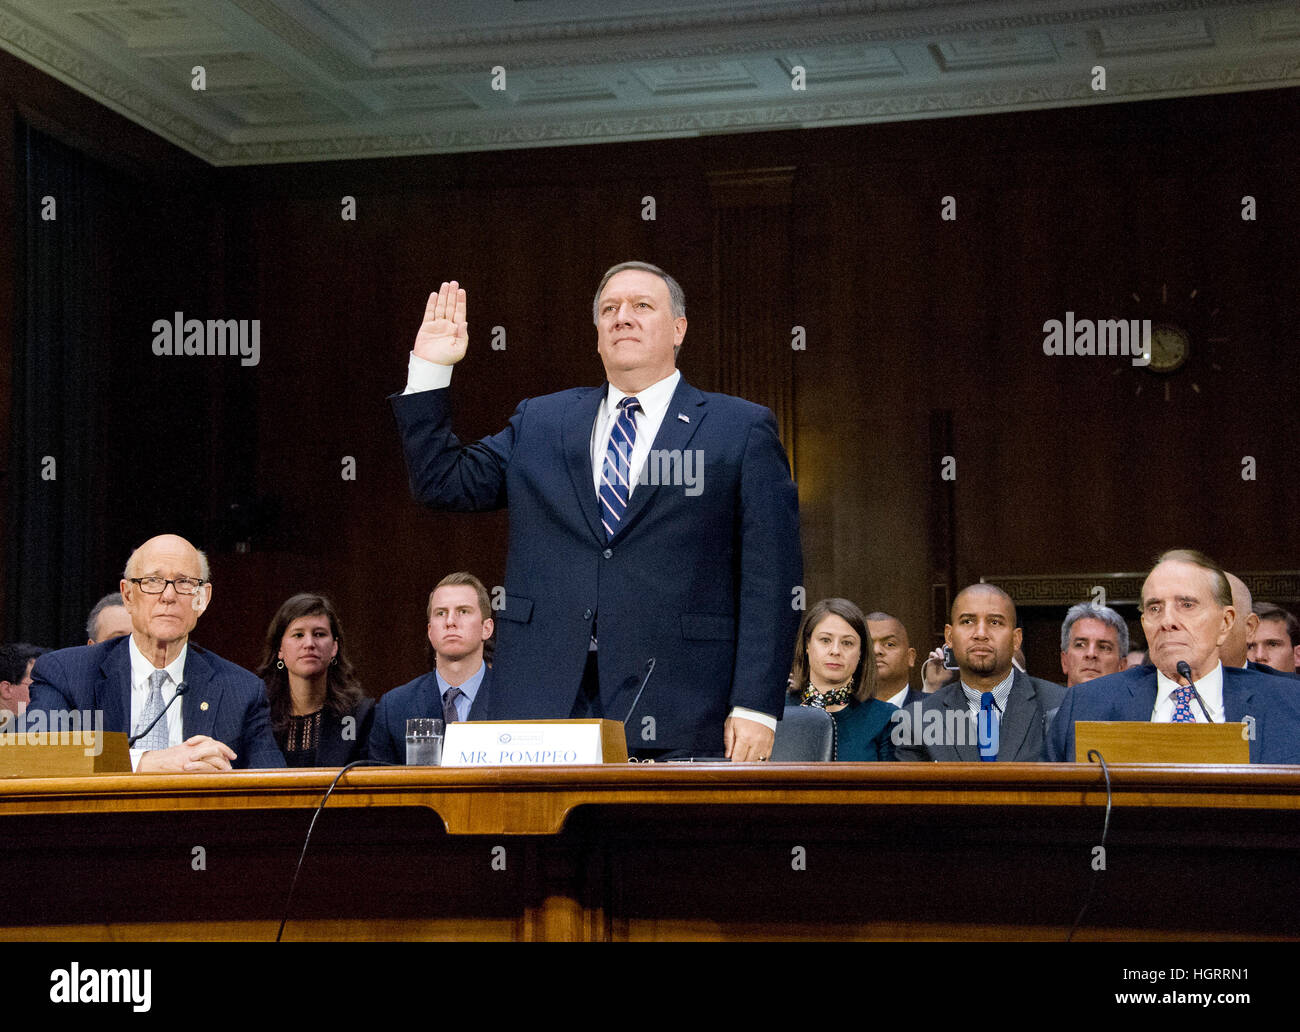 Washington DC, USA. 12th January 2017. United States Representative Mike Pompeo (Republican of Kansas) is sworn-in to testify before the US Senate Select Committee on Intelligence during a confirmation hearing on his nomination to be Director of the Central Intelligence Agency (CIA) on Capitol Hill in Washington, DC on Thursday, January 12, 2017. US Senator Pat Roberts (Republican of Kansas), left, and former US Senate Majority Leader Bob Dole (Republican of Kansas), right, look on from the witness table. Credit: MediaPunch Inc/Alamy Live News Stock Photo